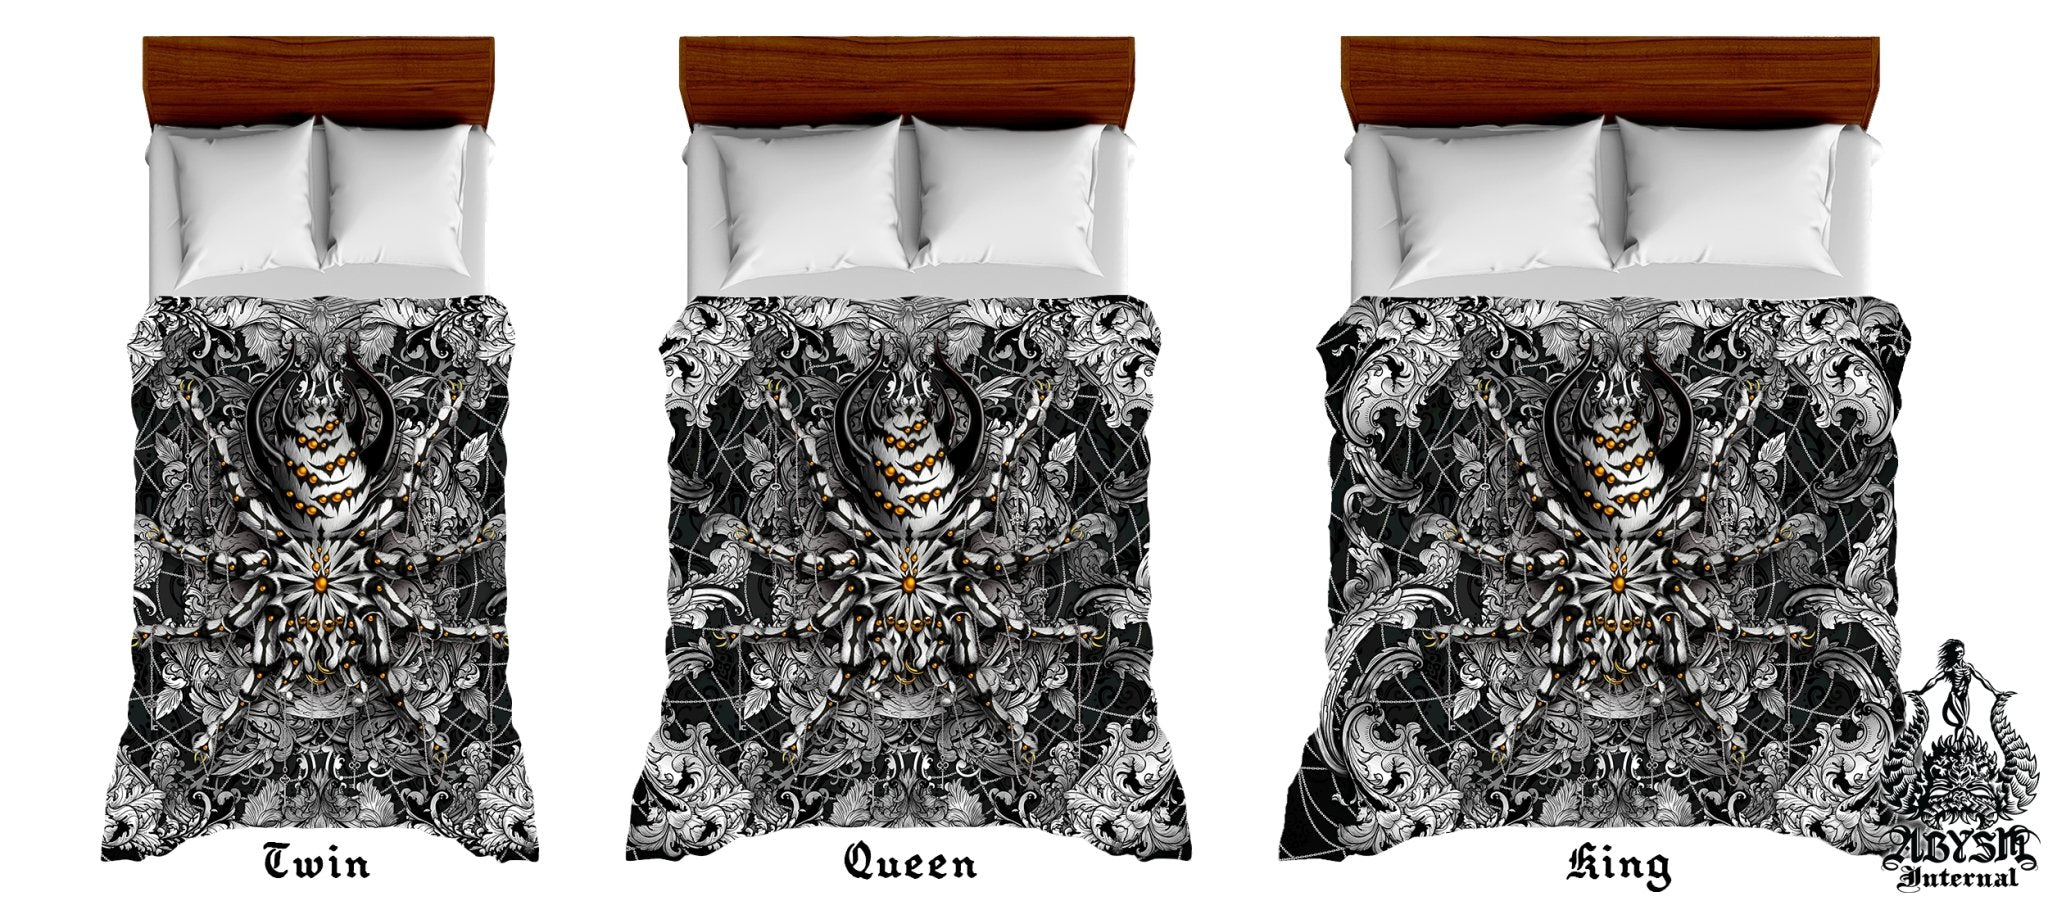 Spider Bedding Set, Comforter and Duvet, Bed Cover and Bedroom Decor, King, Queen and Twin Size - Tarantula Silver Black - Abysm Internal